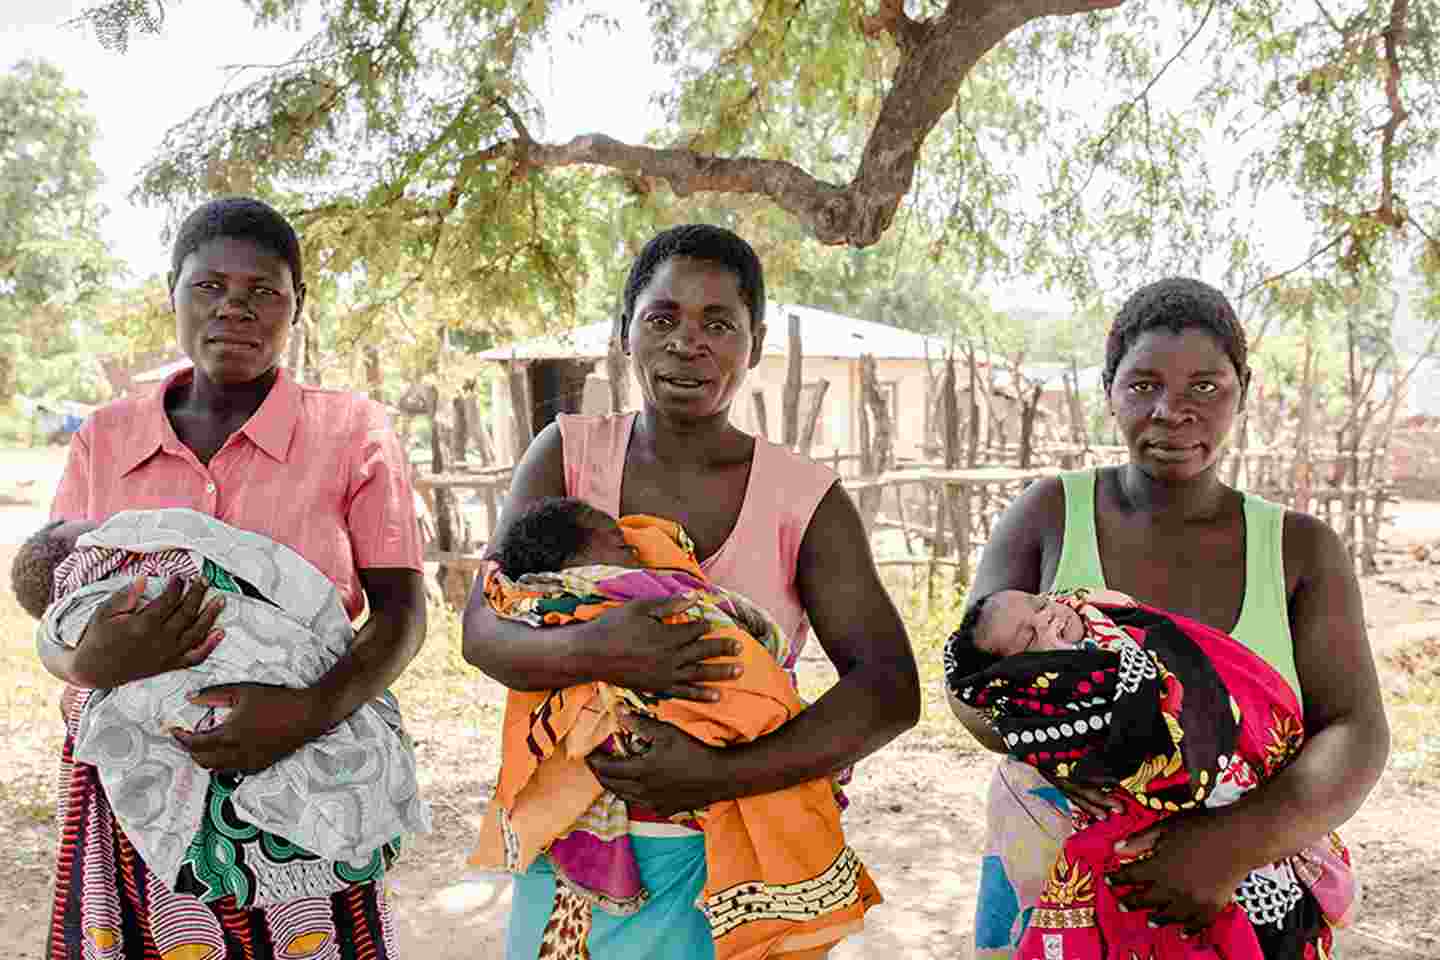 Women with their babies in Malawi, where the Finnish Red Cross supports work on sexual and reproductive health and rights.